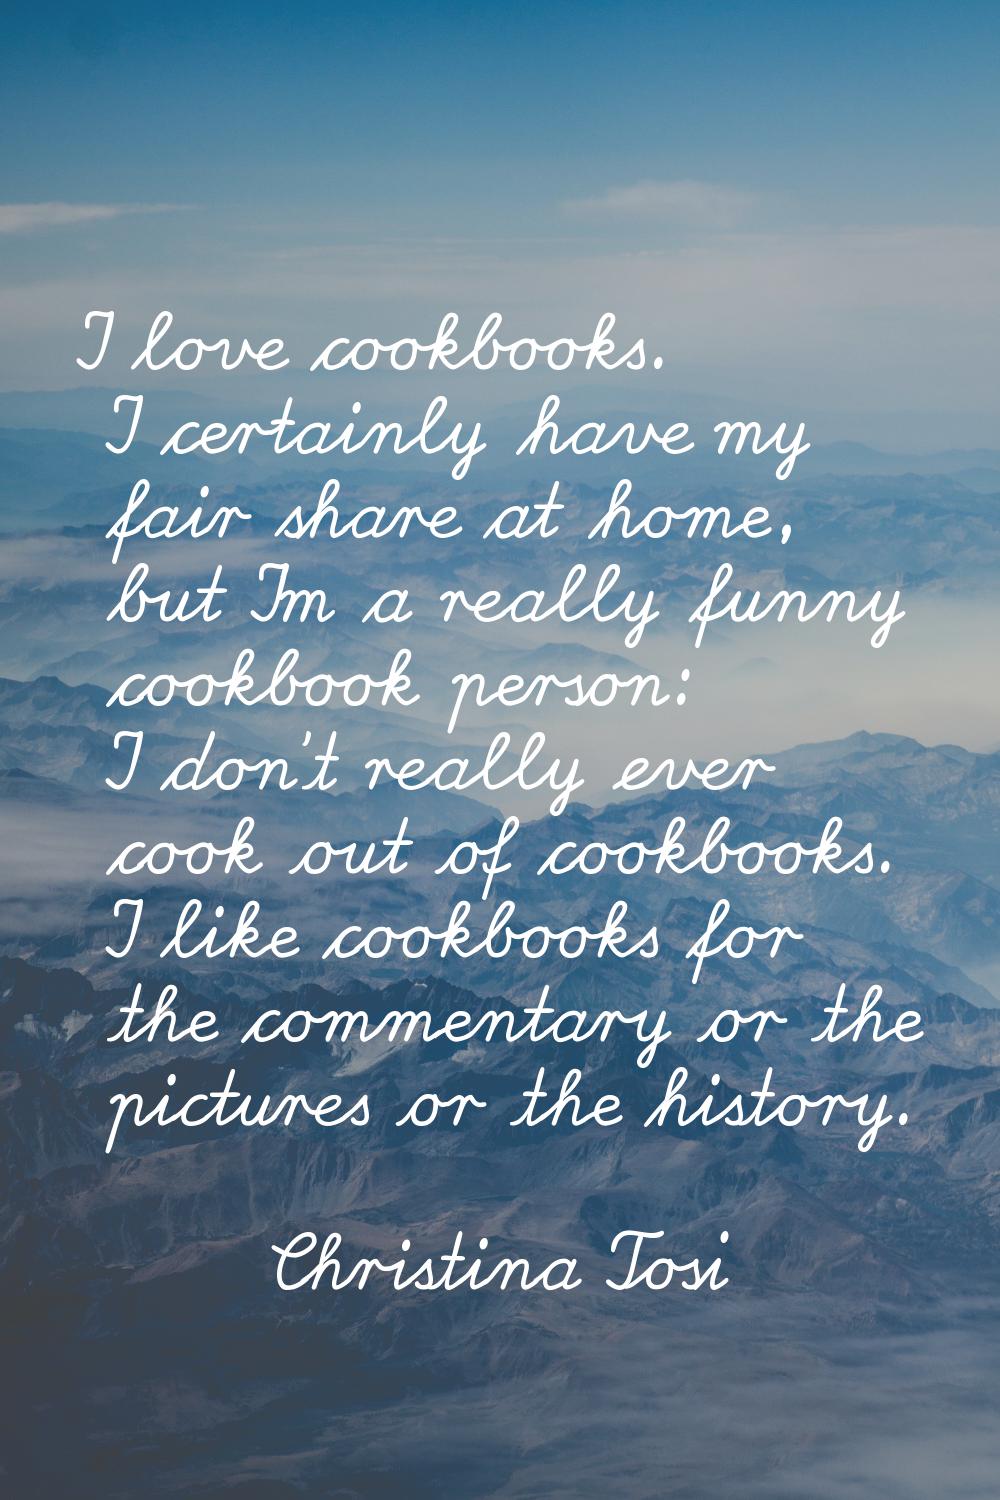 I love cookbooks. I certainly have my fair share at home, but I'm a really funny cookbook person: I